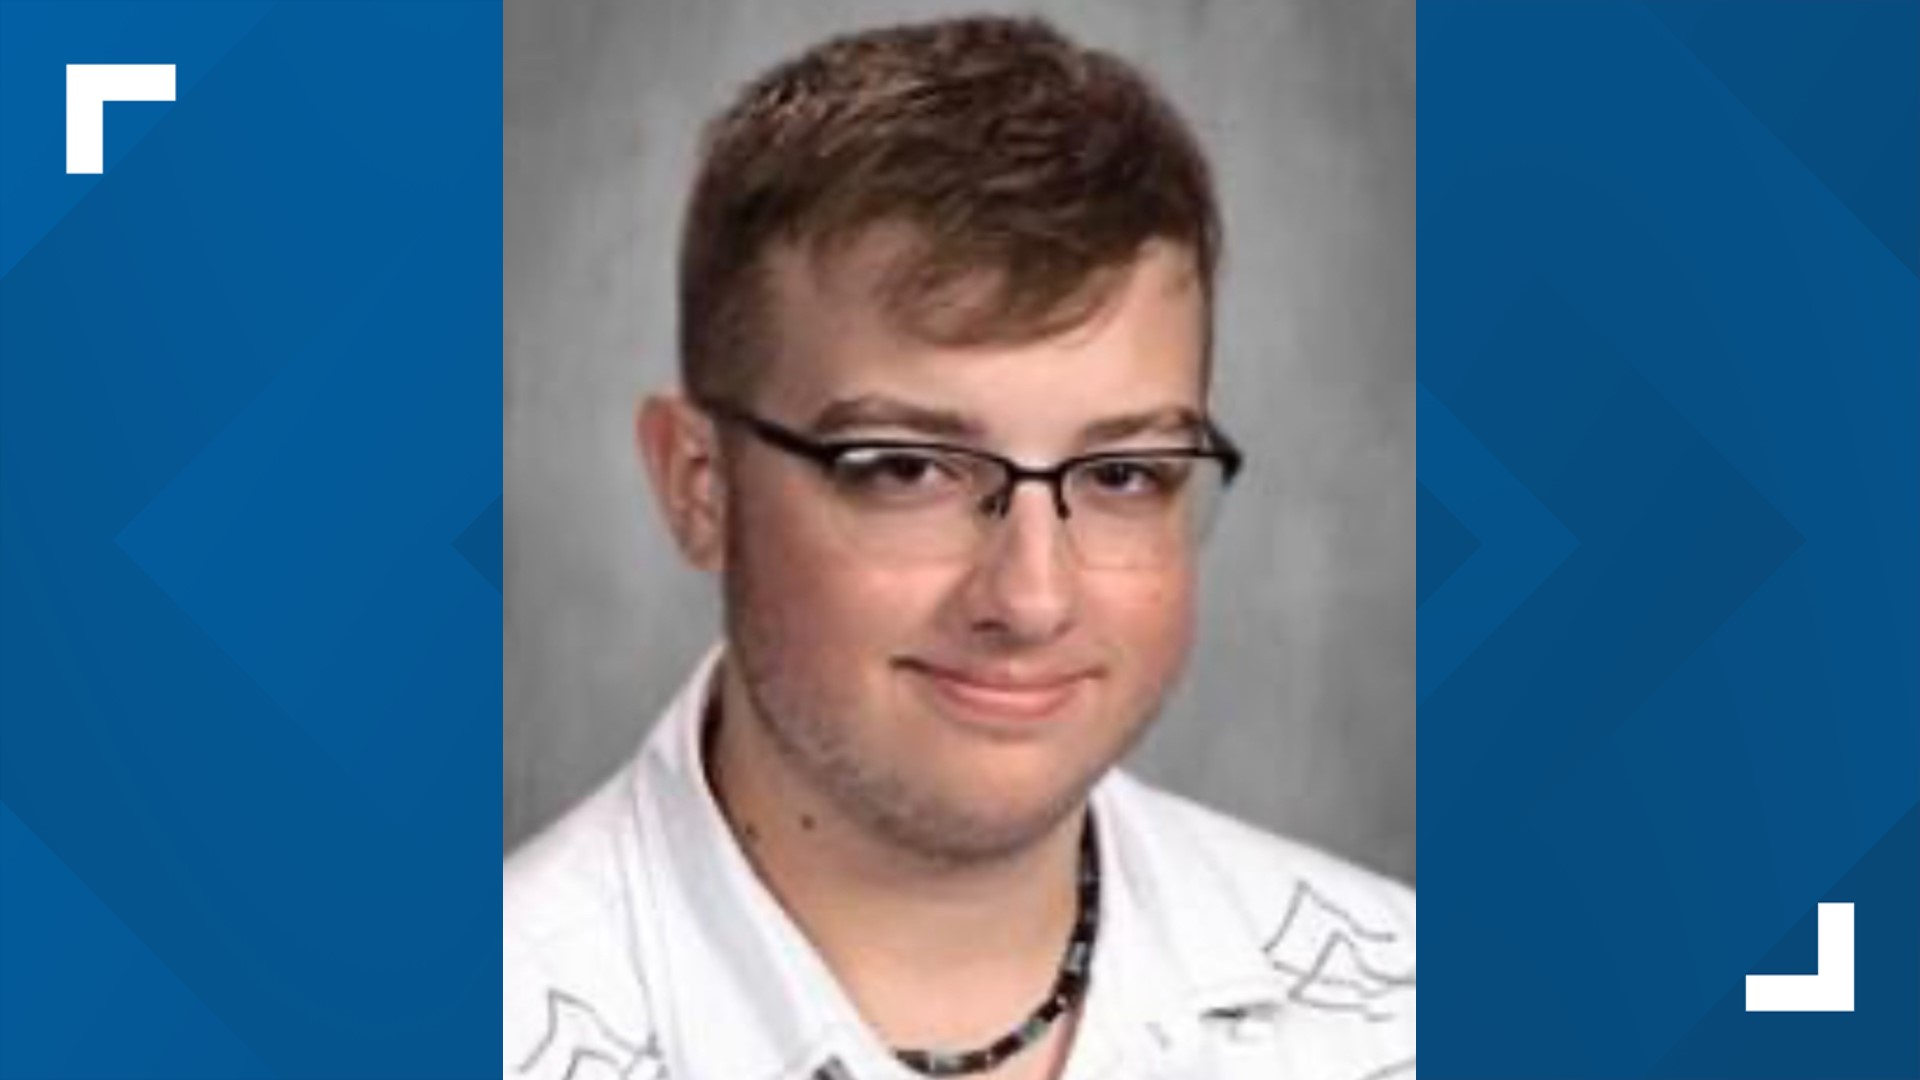 Crash investigators determined that Dylan Palmer, 17, was driving a Mitsubishi Eclipse west on Hancock County 500 North in Maxwell when he crashed.